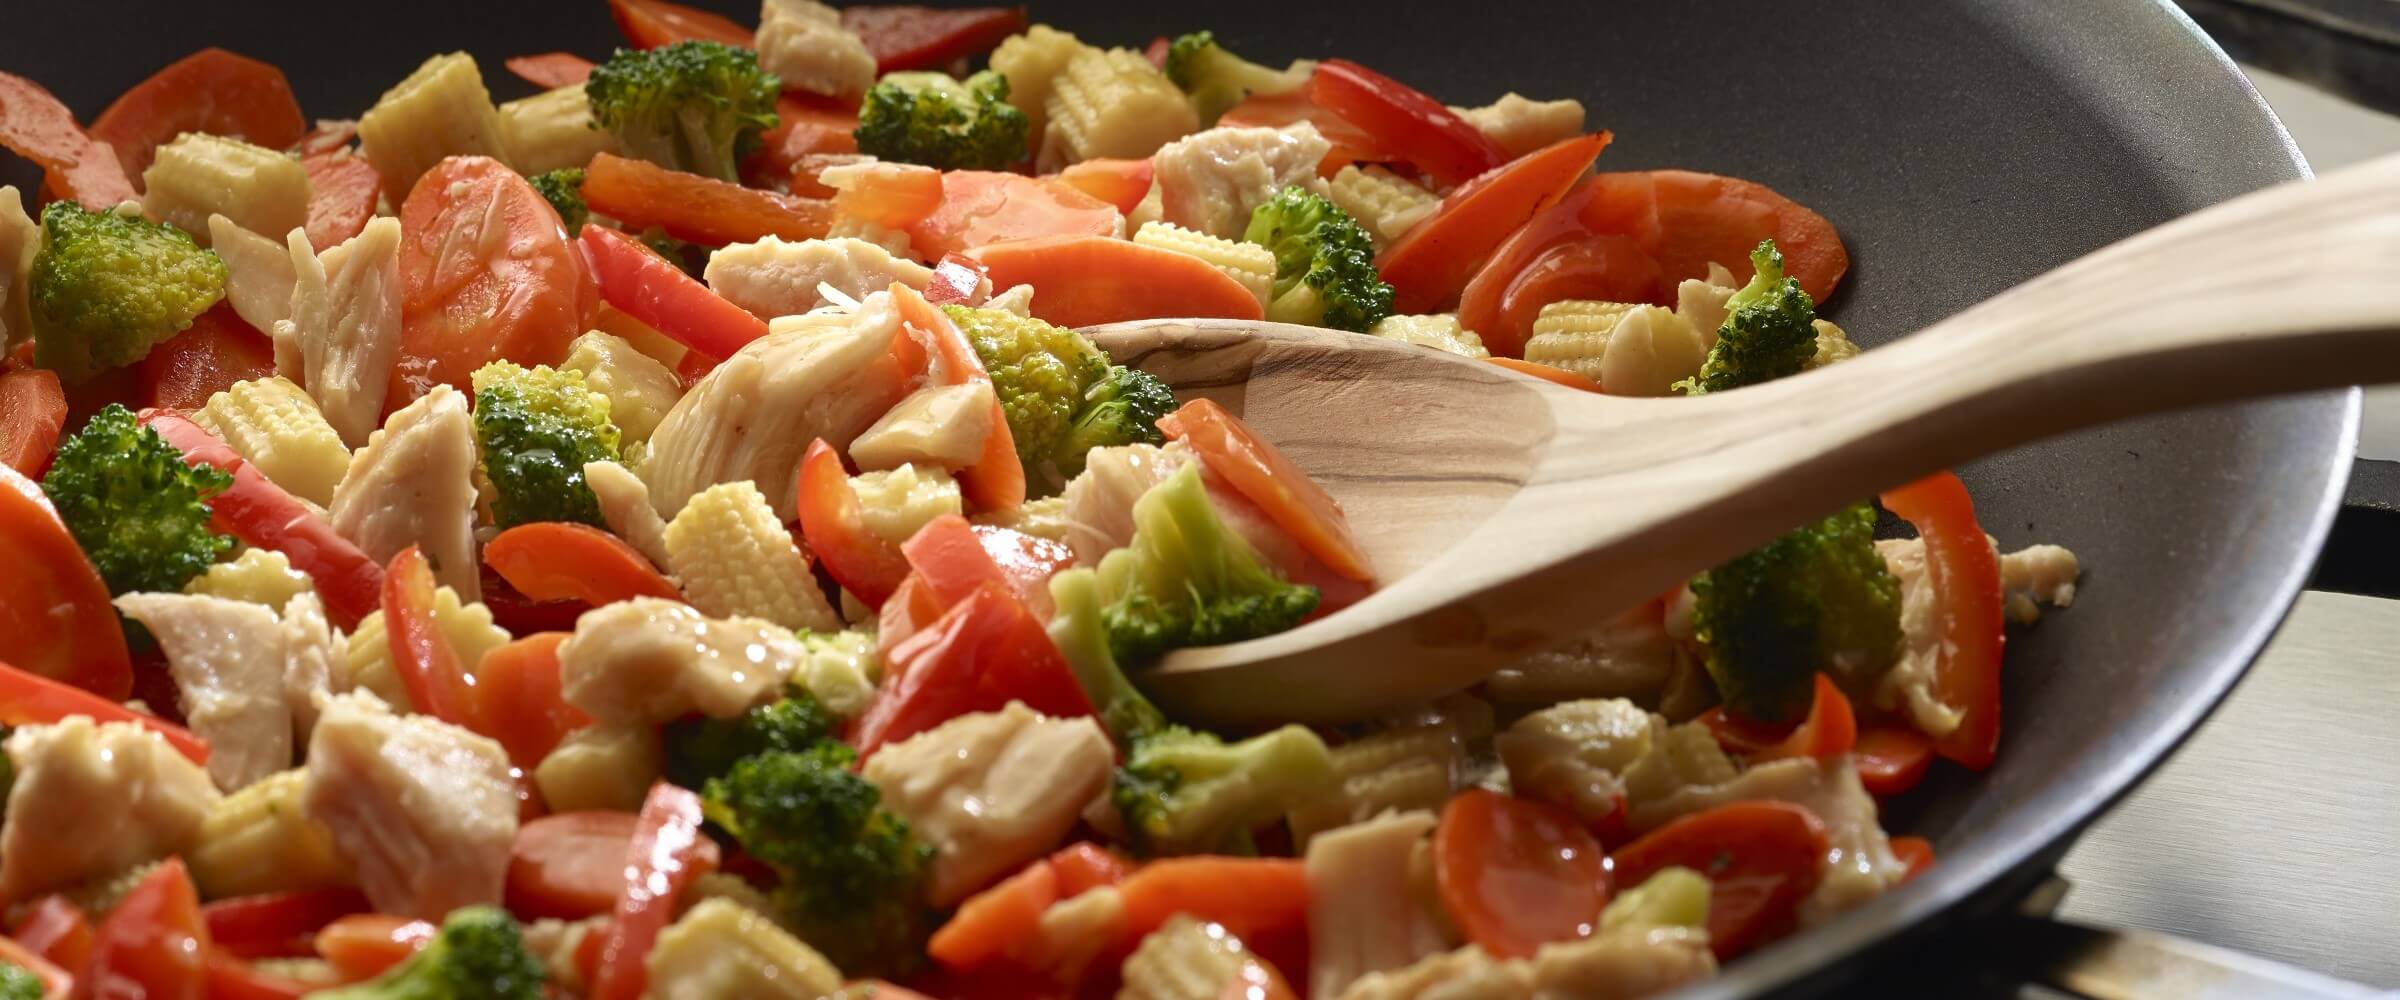 Ginger chicken stir fry with vegetables with wooden spoon in skillet